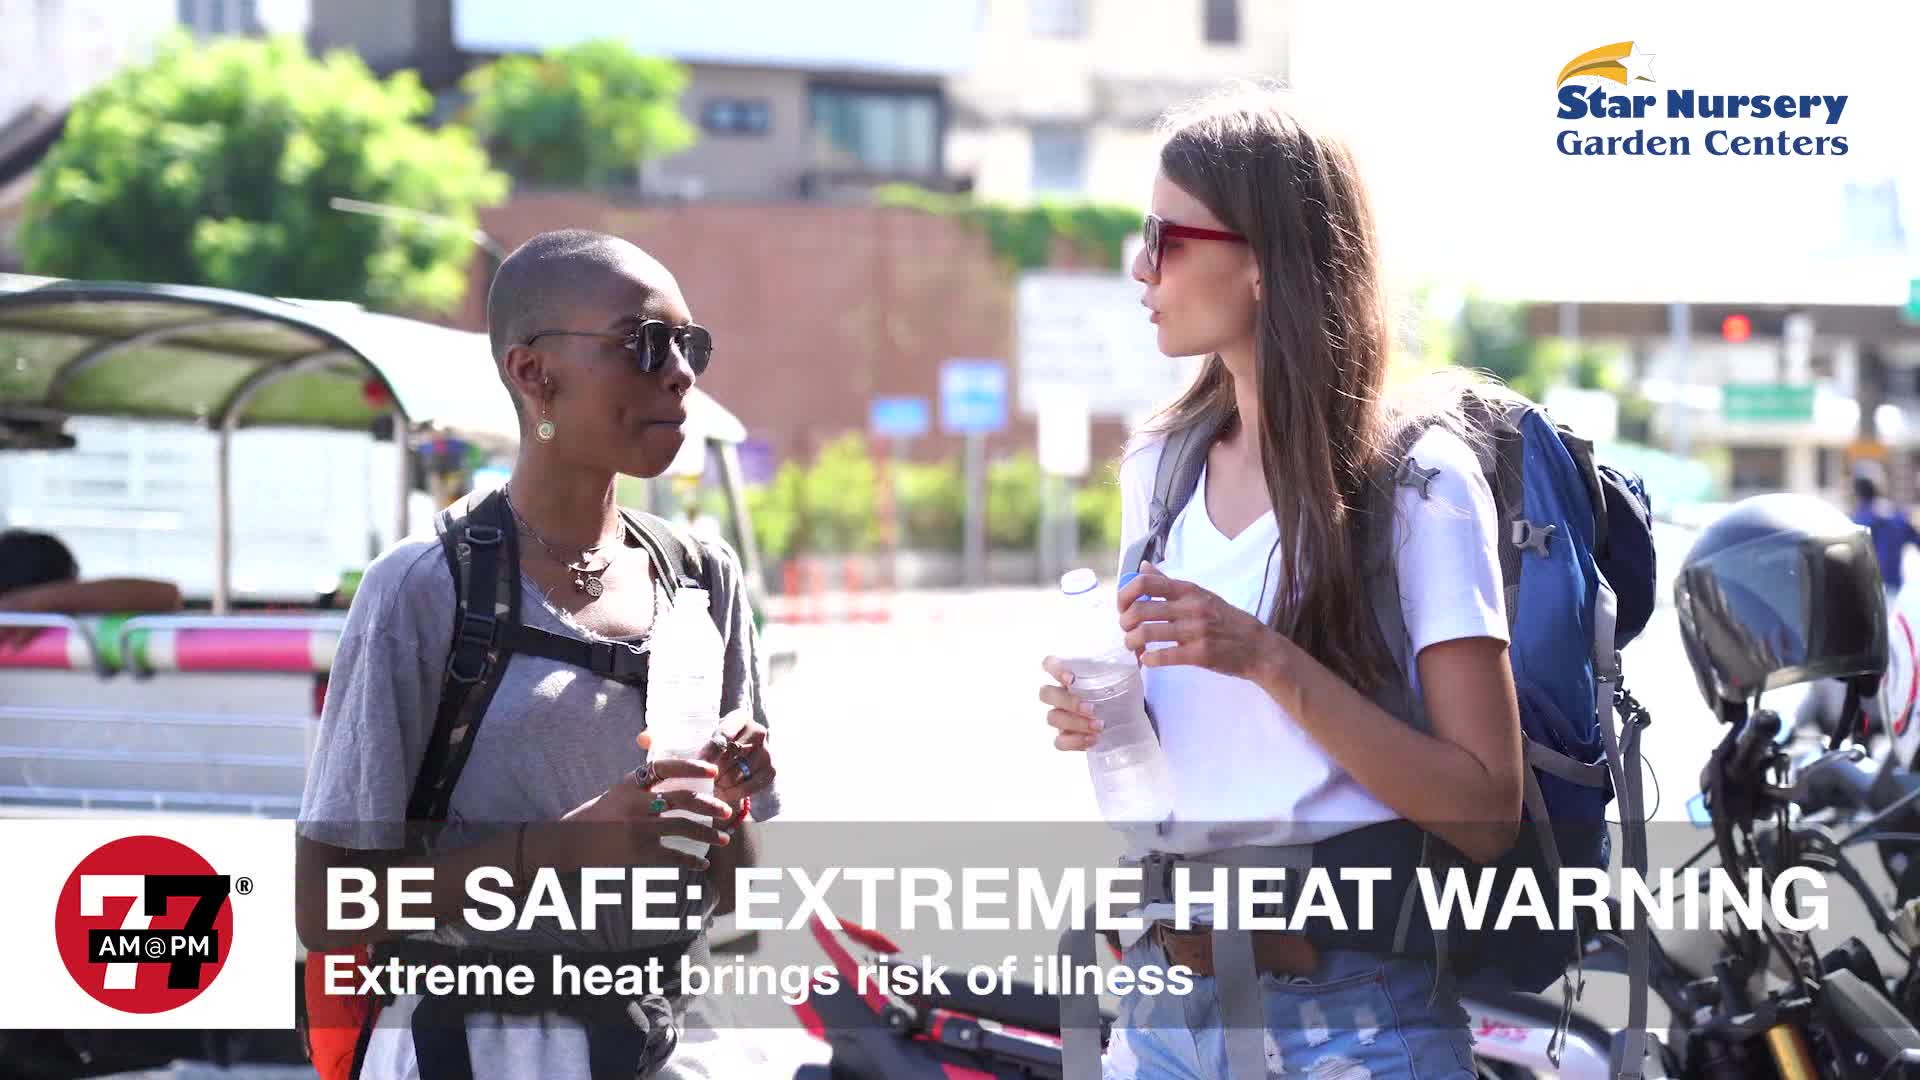 Excessive heat warning issued by National Weather Service